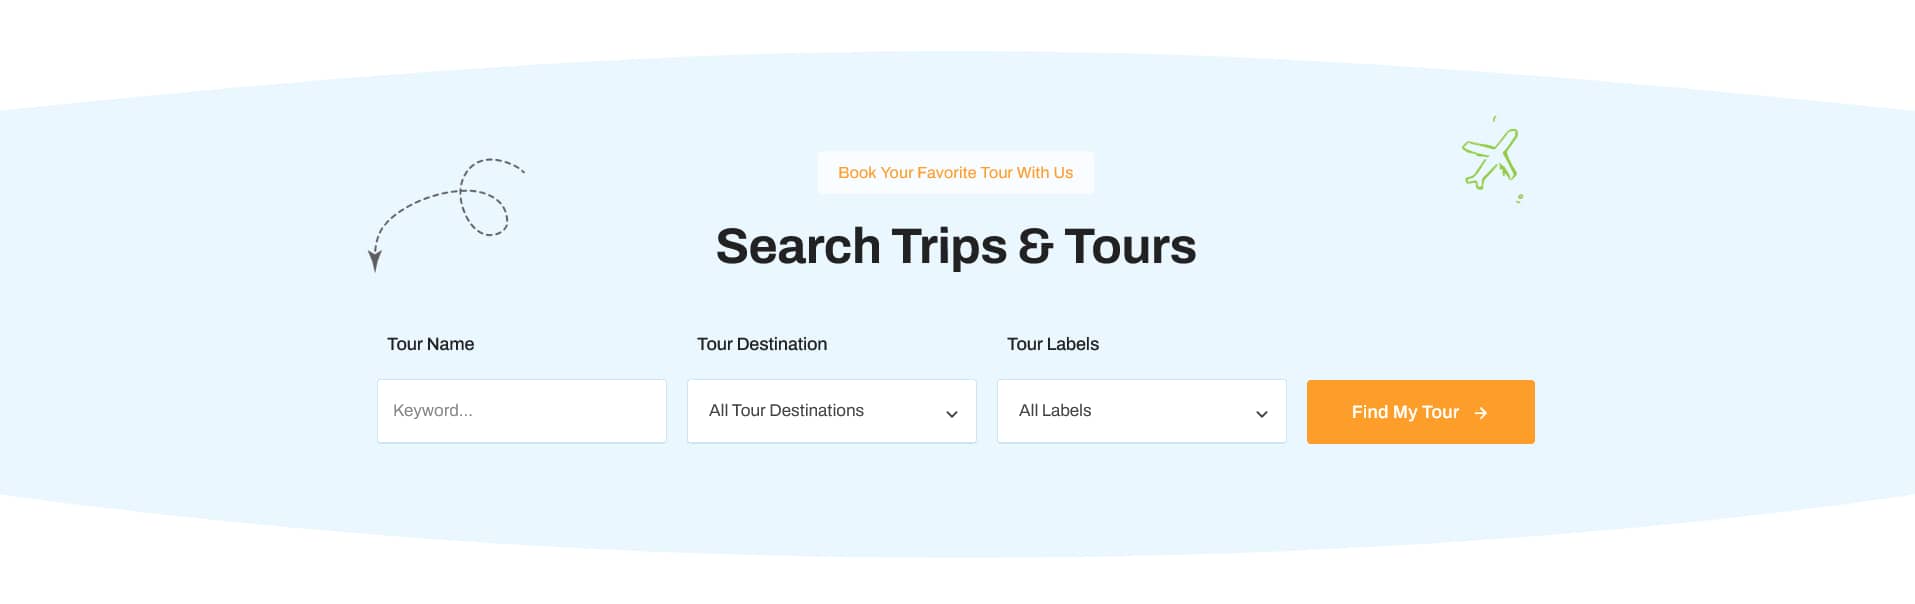 Avada Tour Operator Search Form